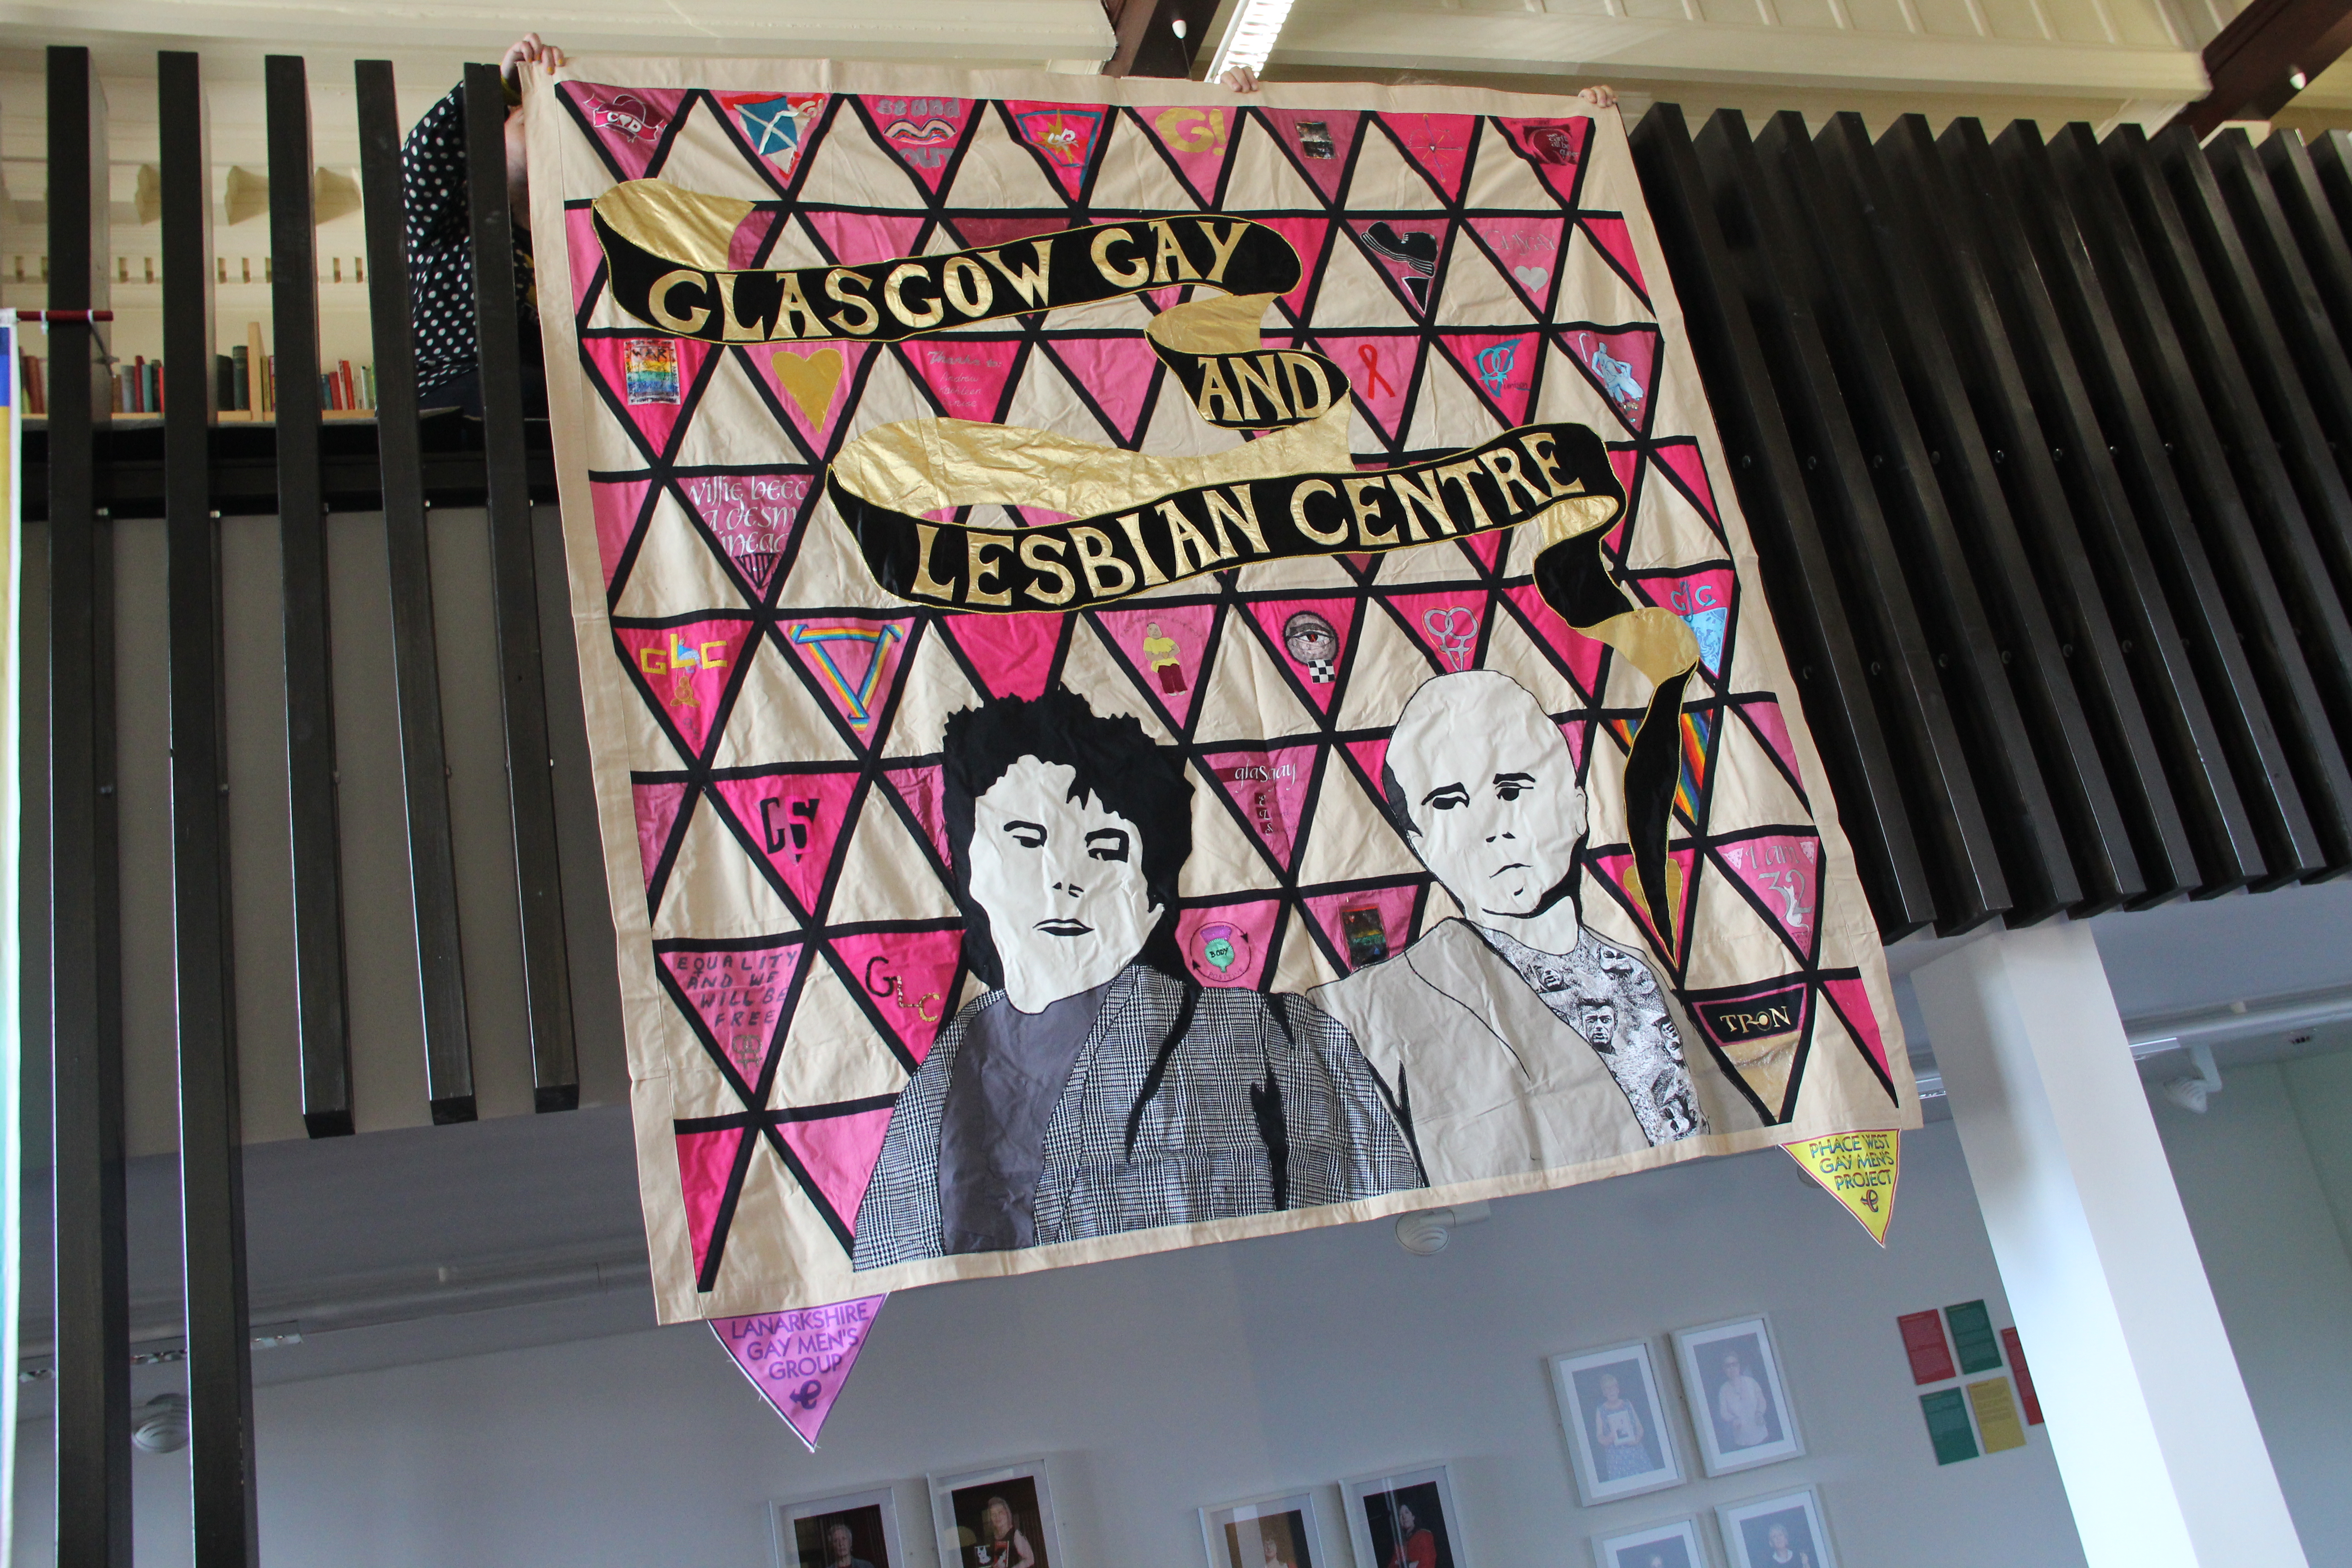 Glasgow Gay and Lesbian Centre banner from the GWL Collection